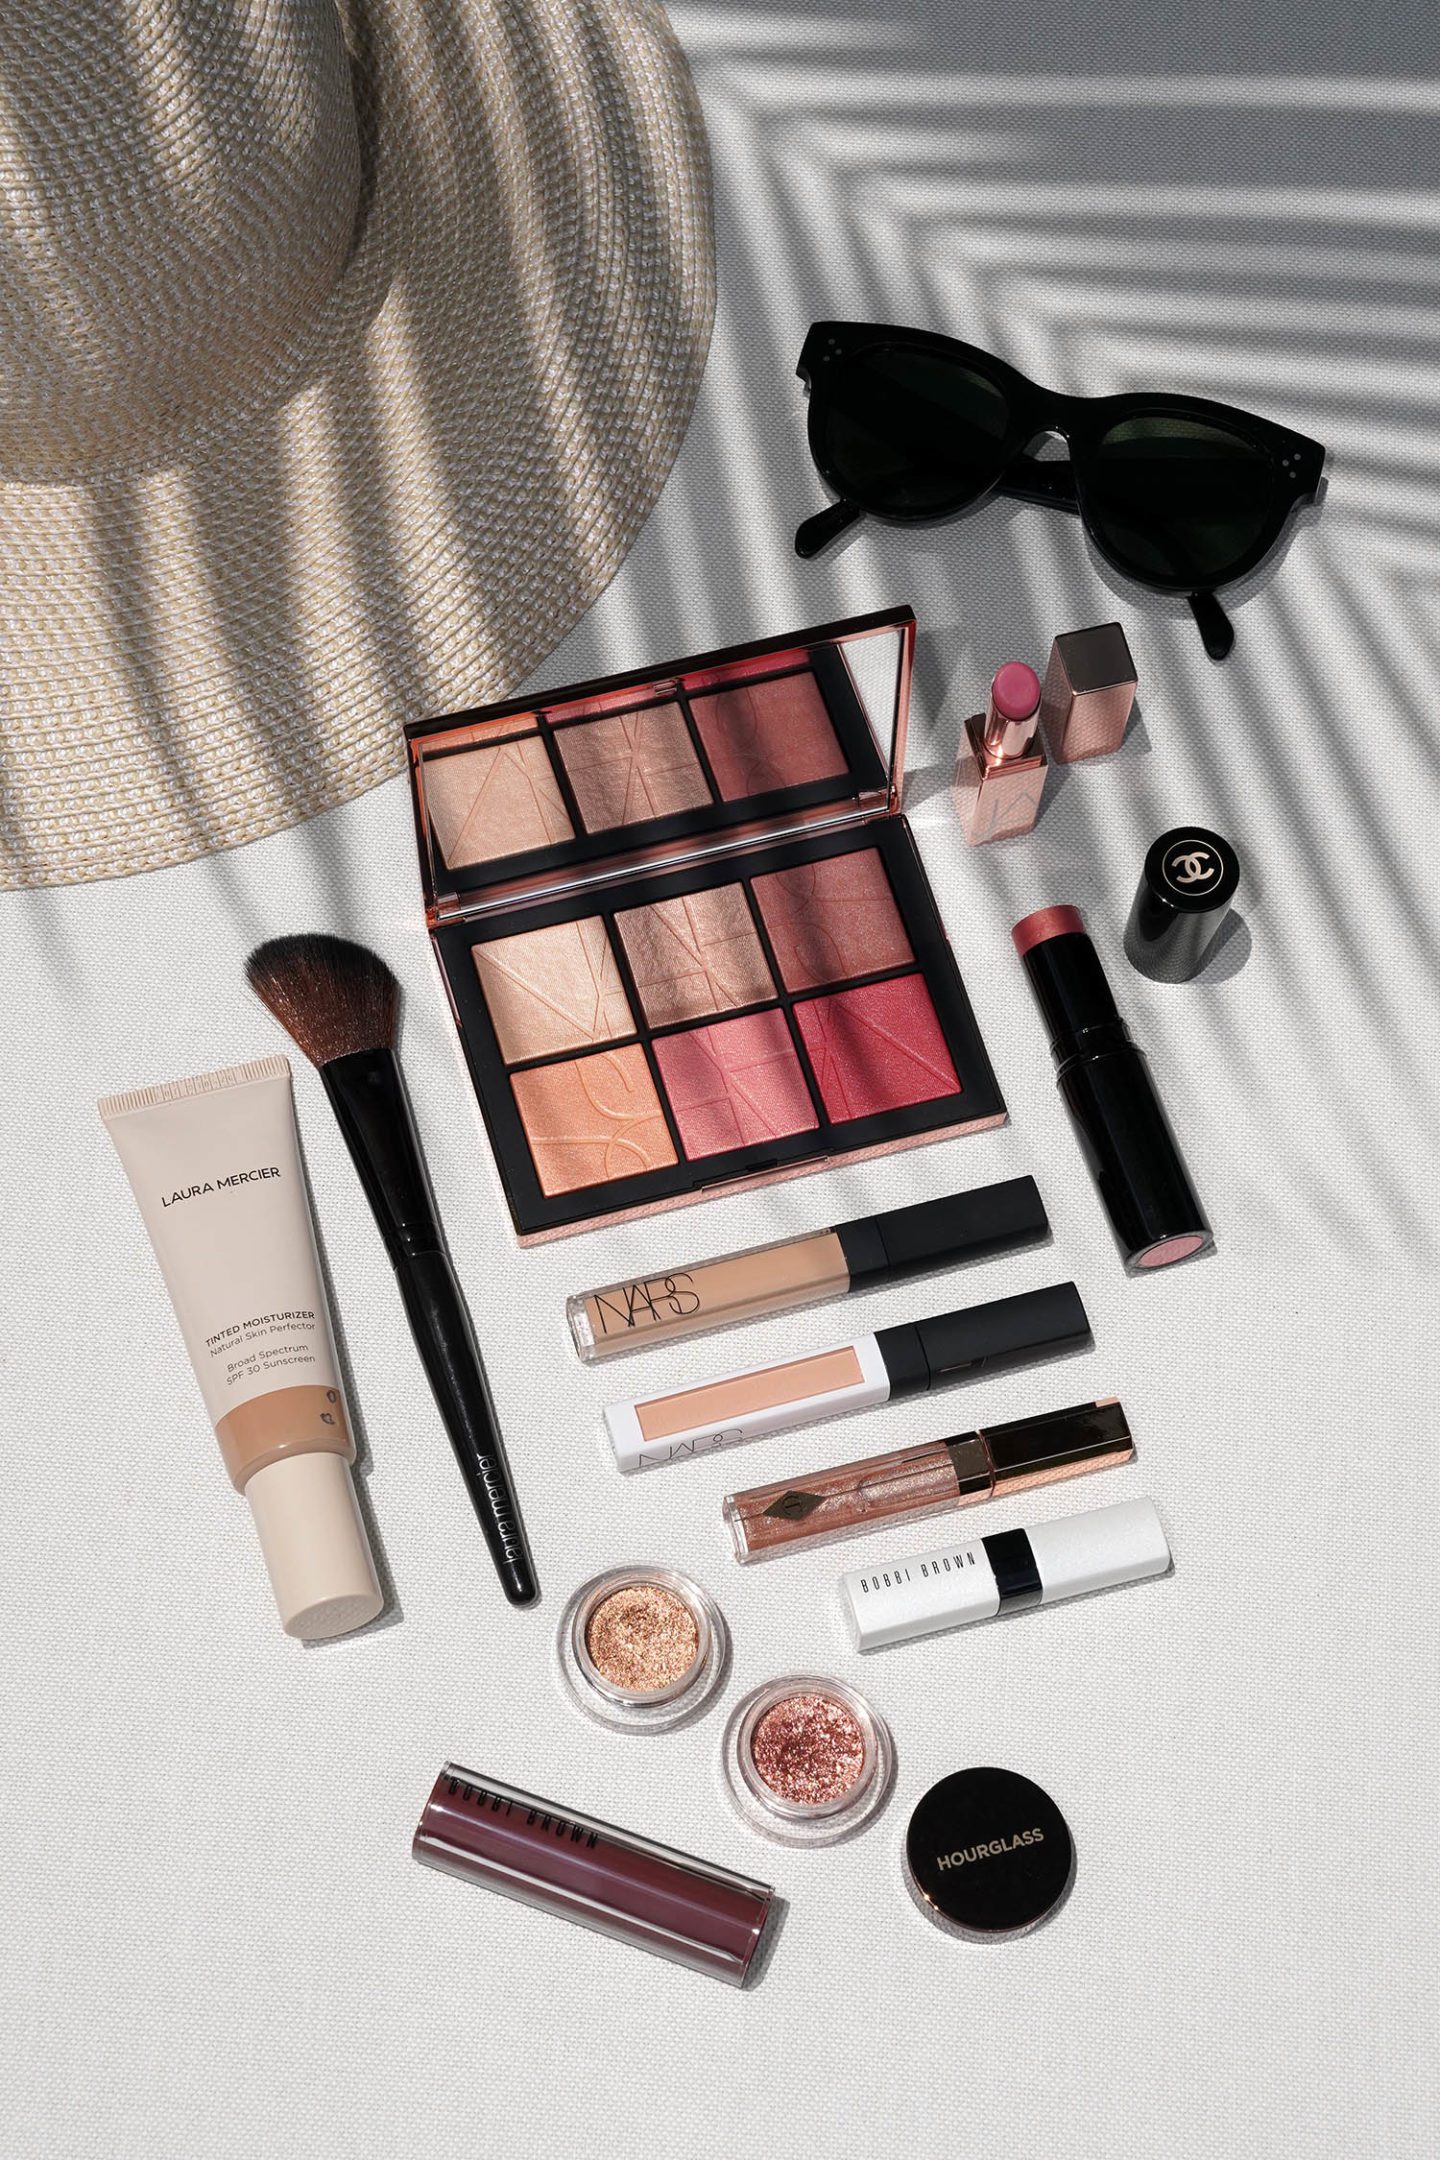 Summer Beauty Essentials from Nordstrom